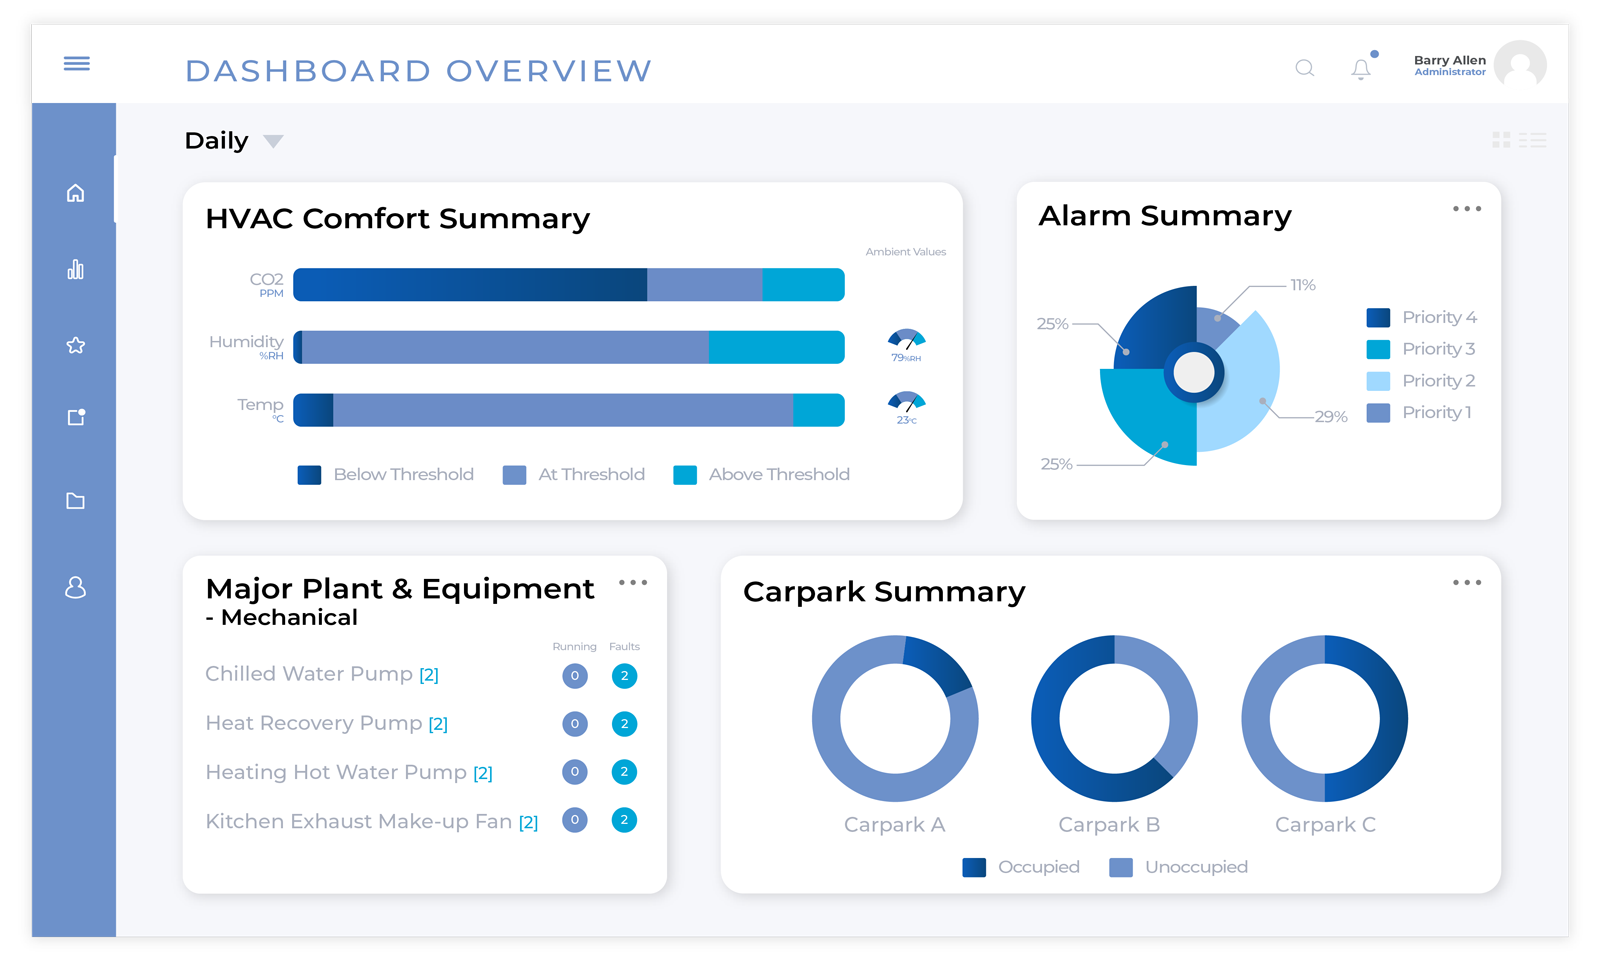 Smart Building Dashboard Overview